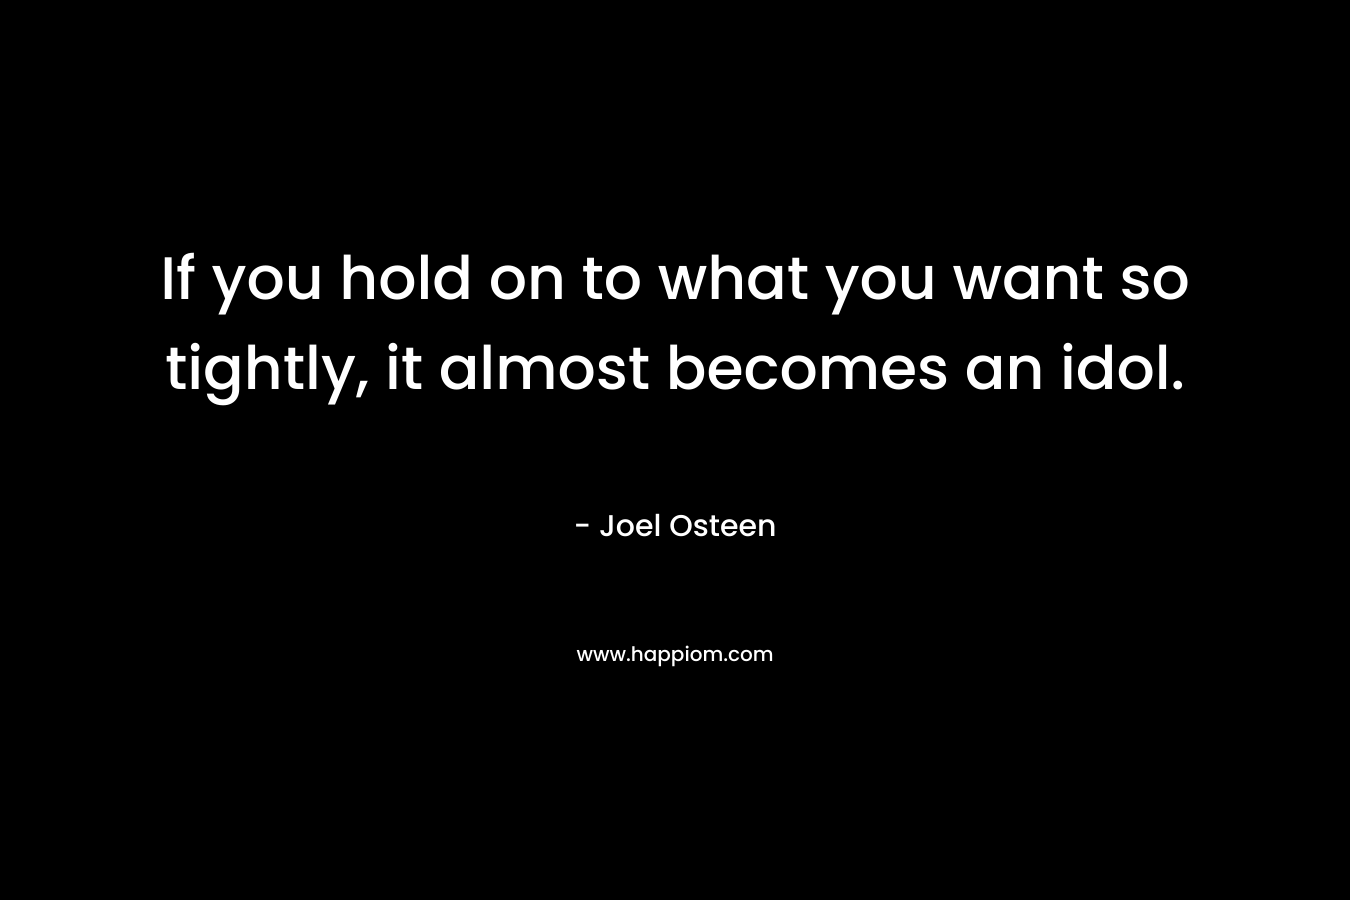 If you hold on to what you want so tightly, it almost becomes an idol. – Joel Osteen